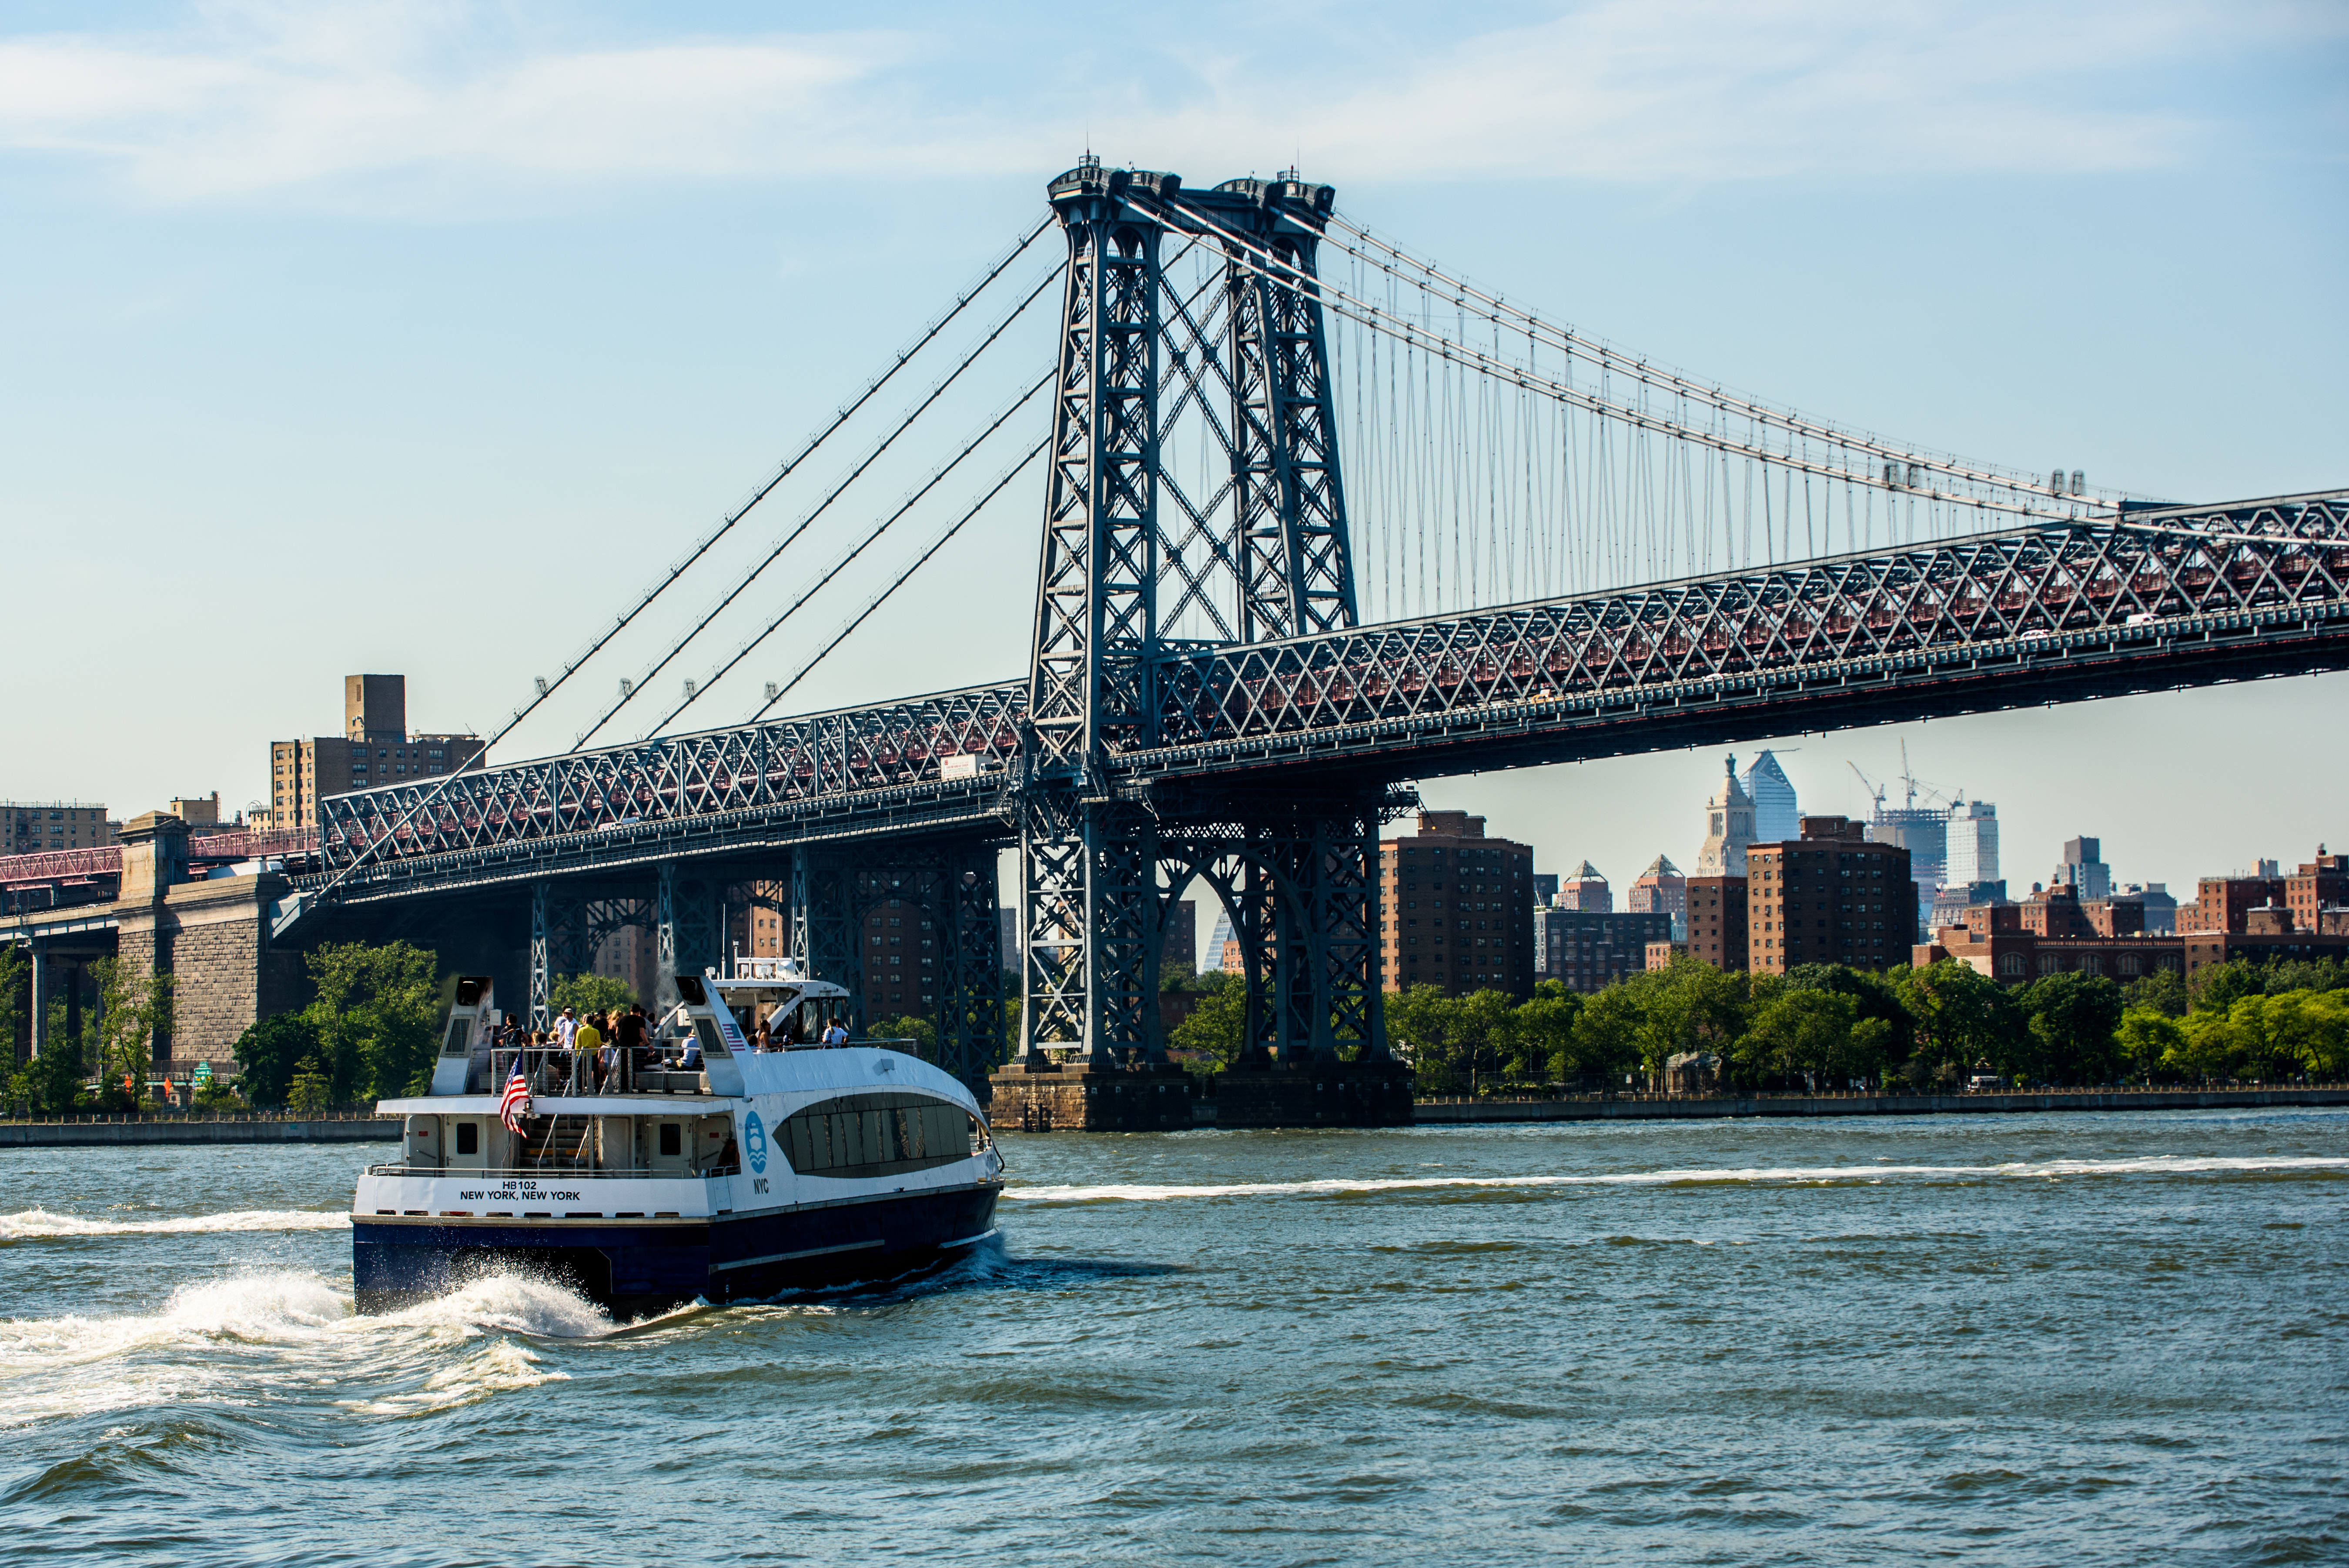 NYC Ferry vessel on the East River. Image via NYC Ferry.